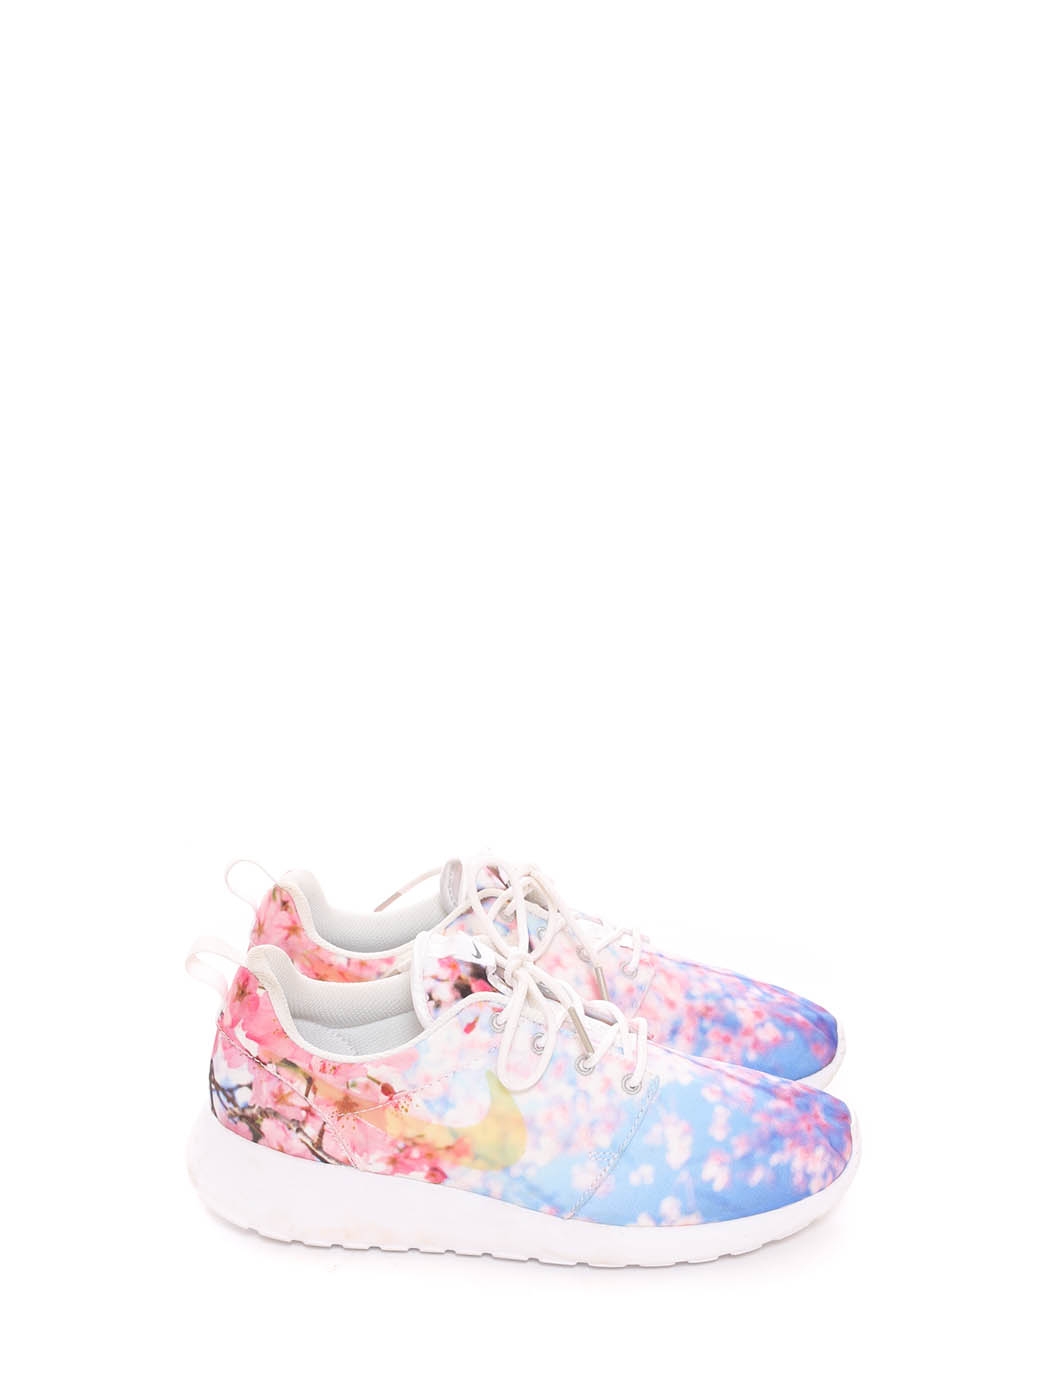 Boutique ROSHE Run One Cherry Blossom floral print sneakers Size 38